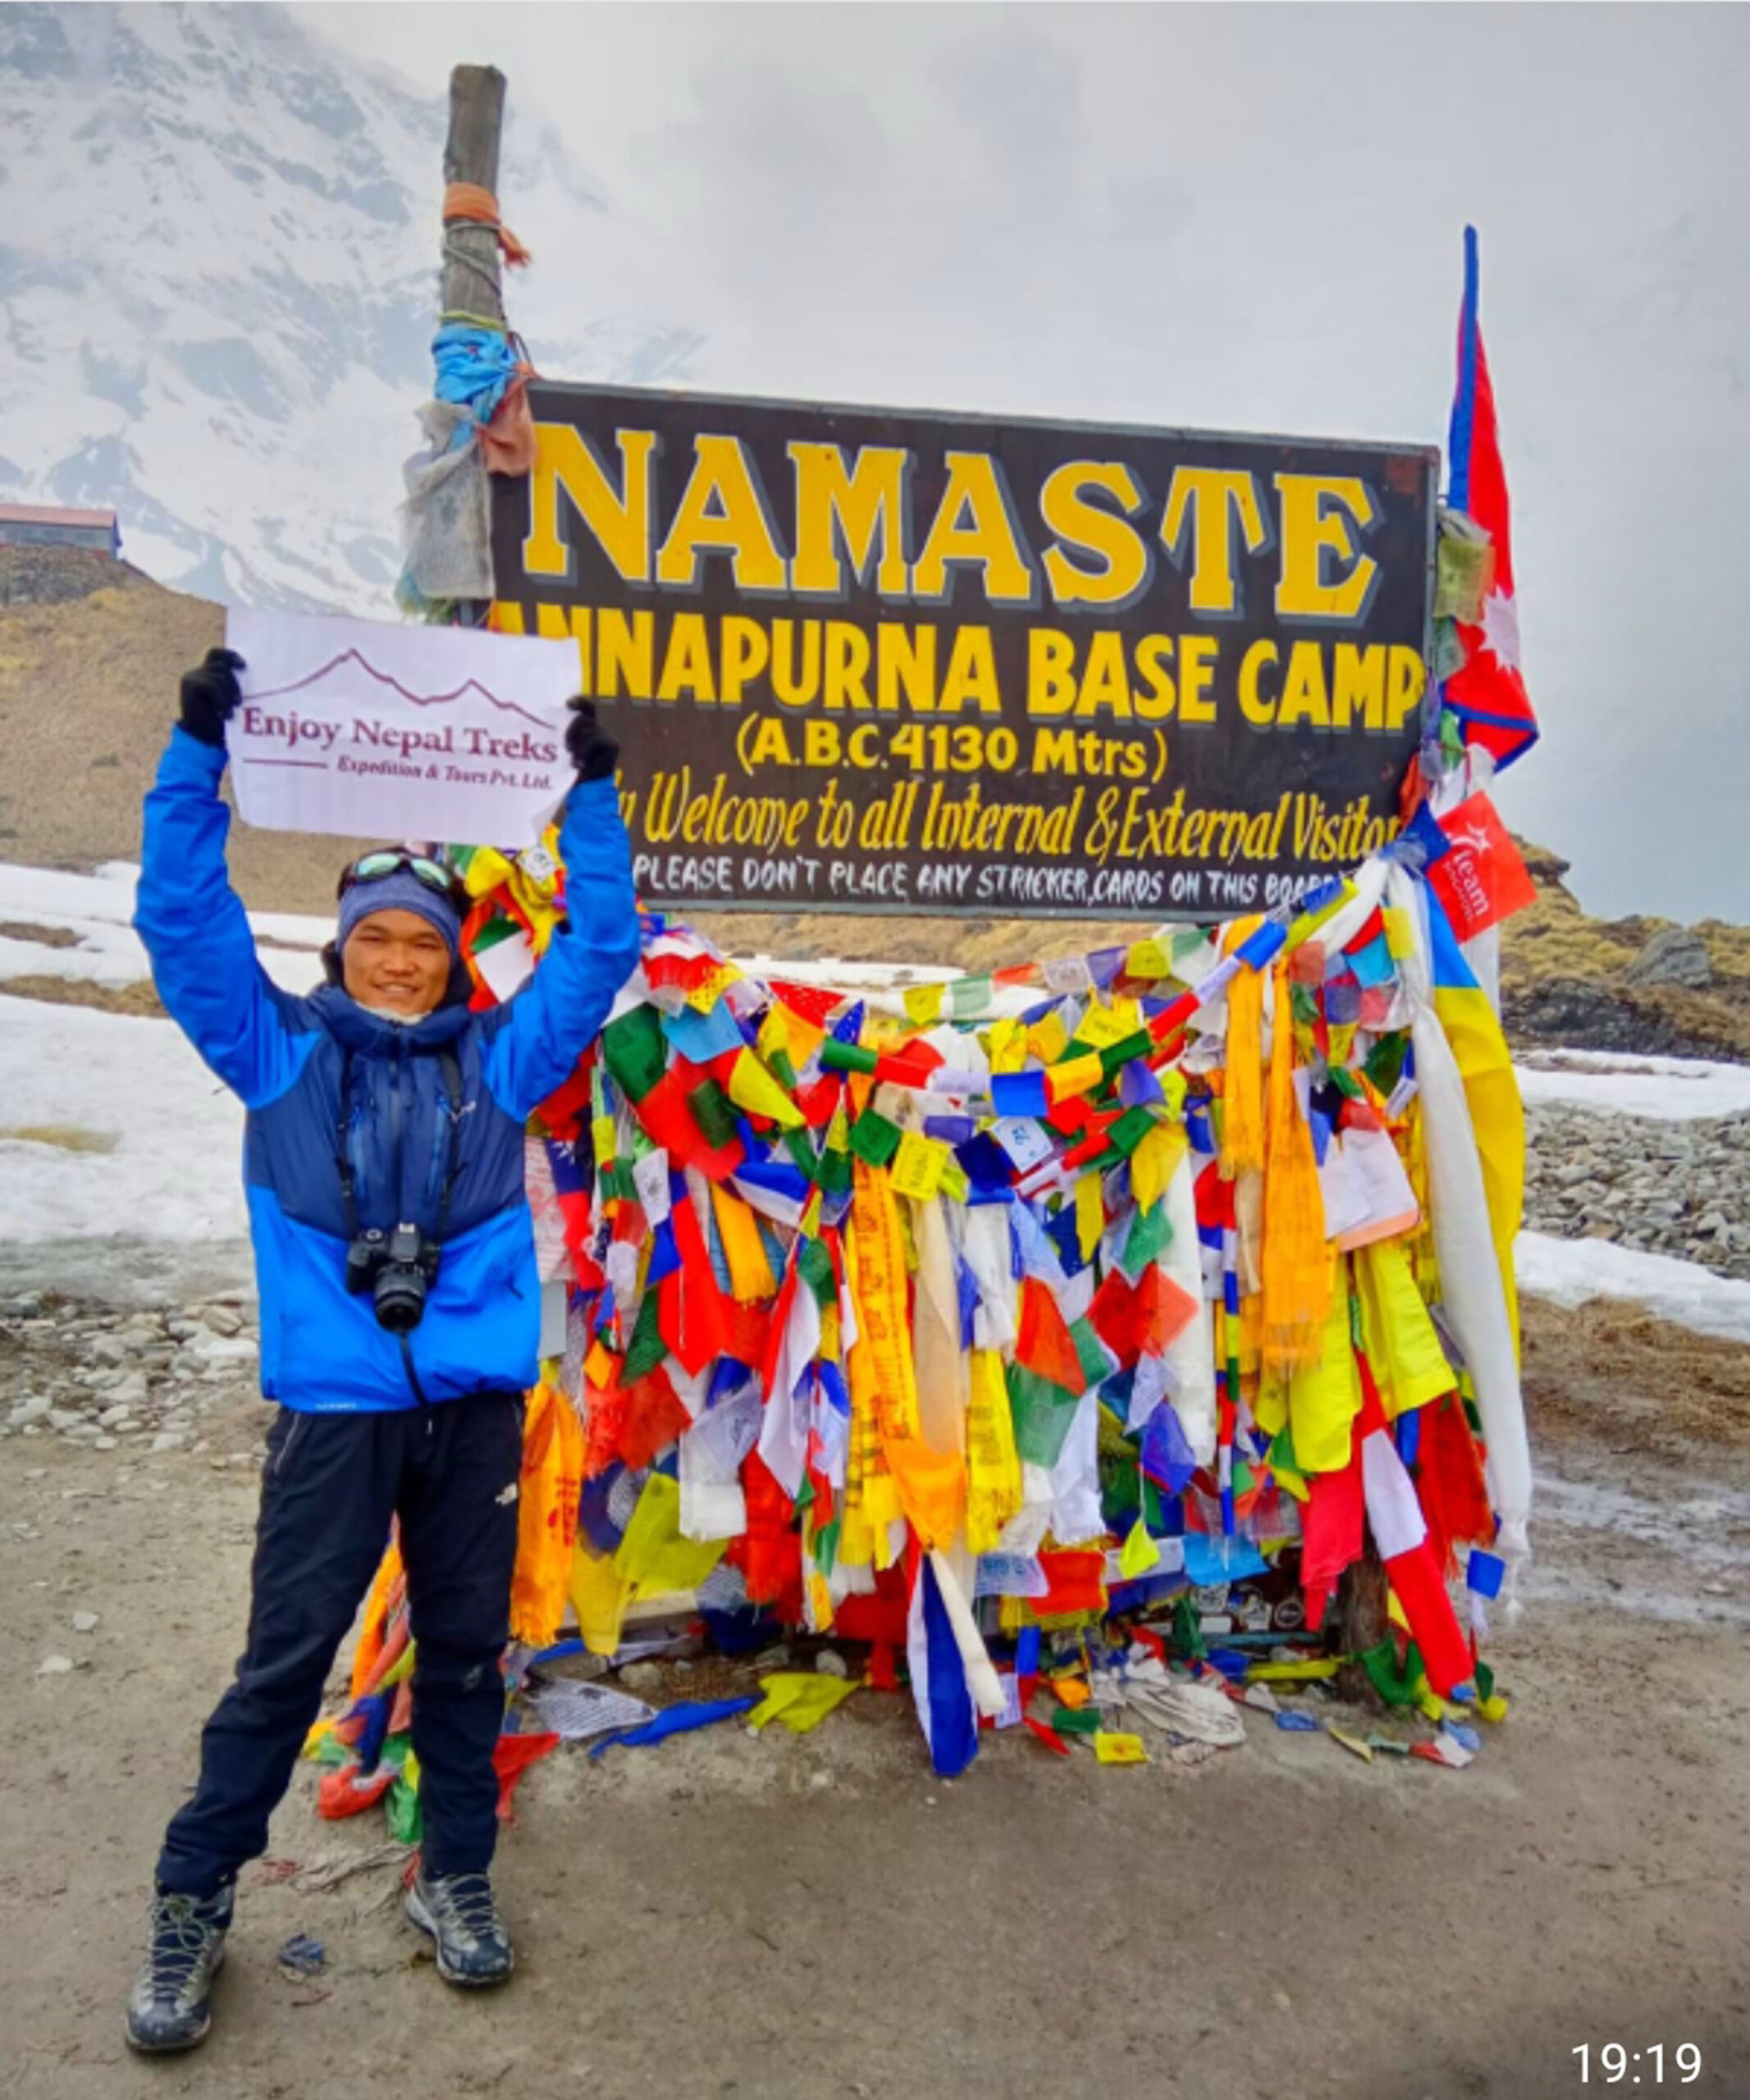 Annapurna Base Camp Trek Guide Cost,Price/ Guide for ABC